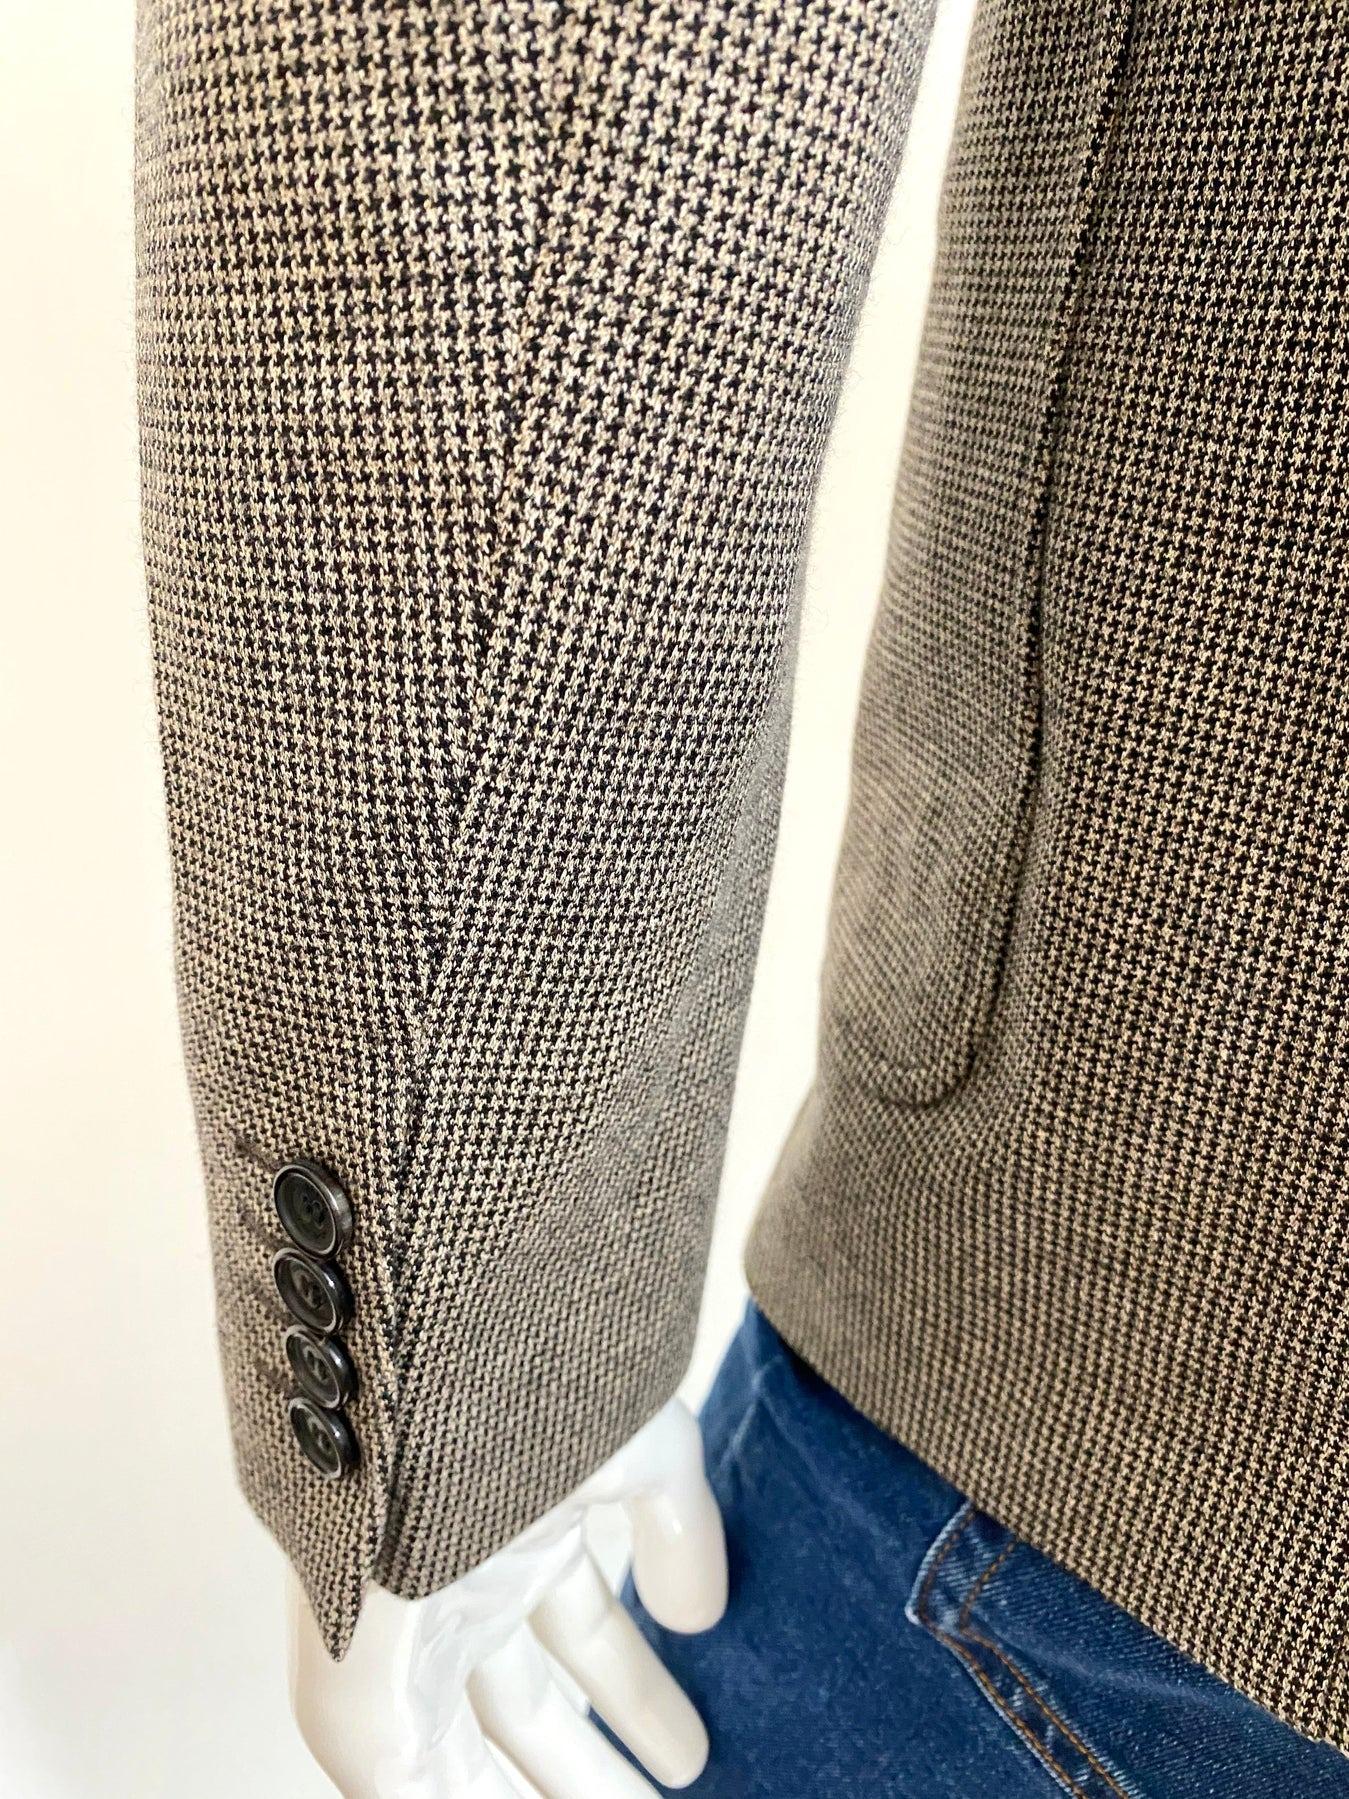 Burberry Houndstooth Jacket For Sale 2